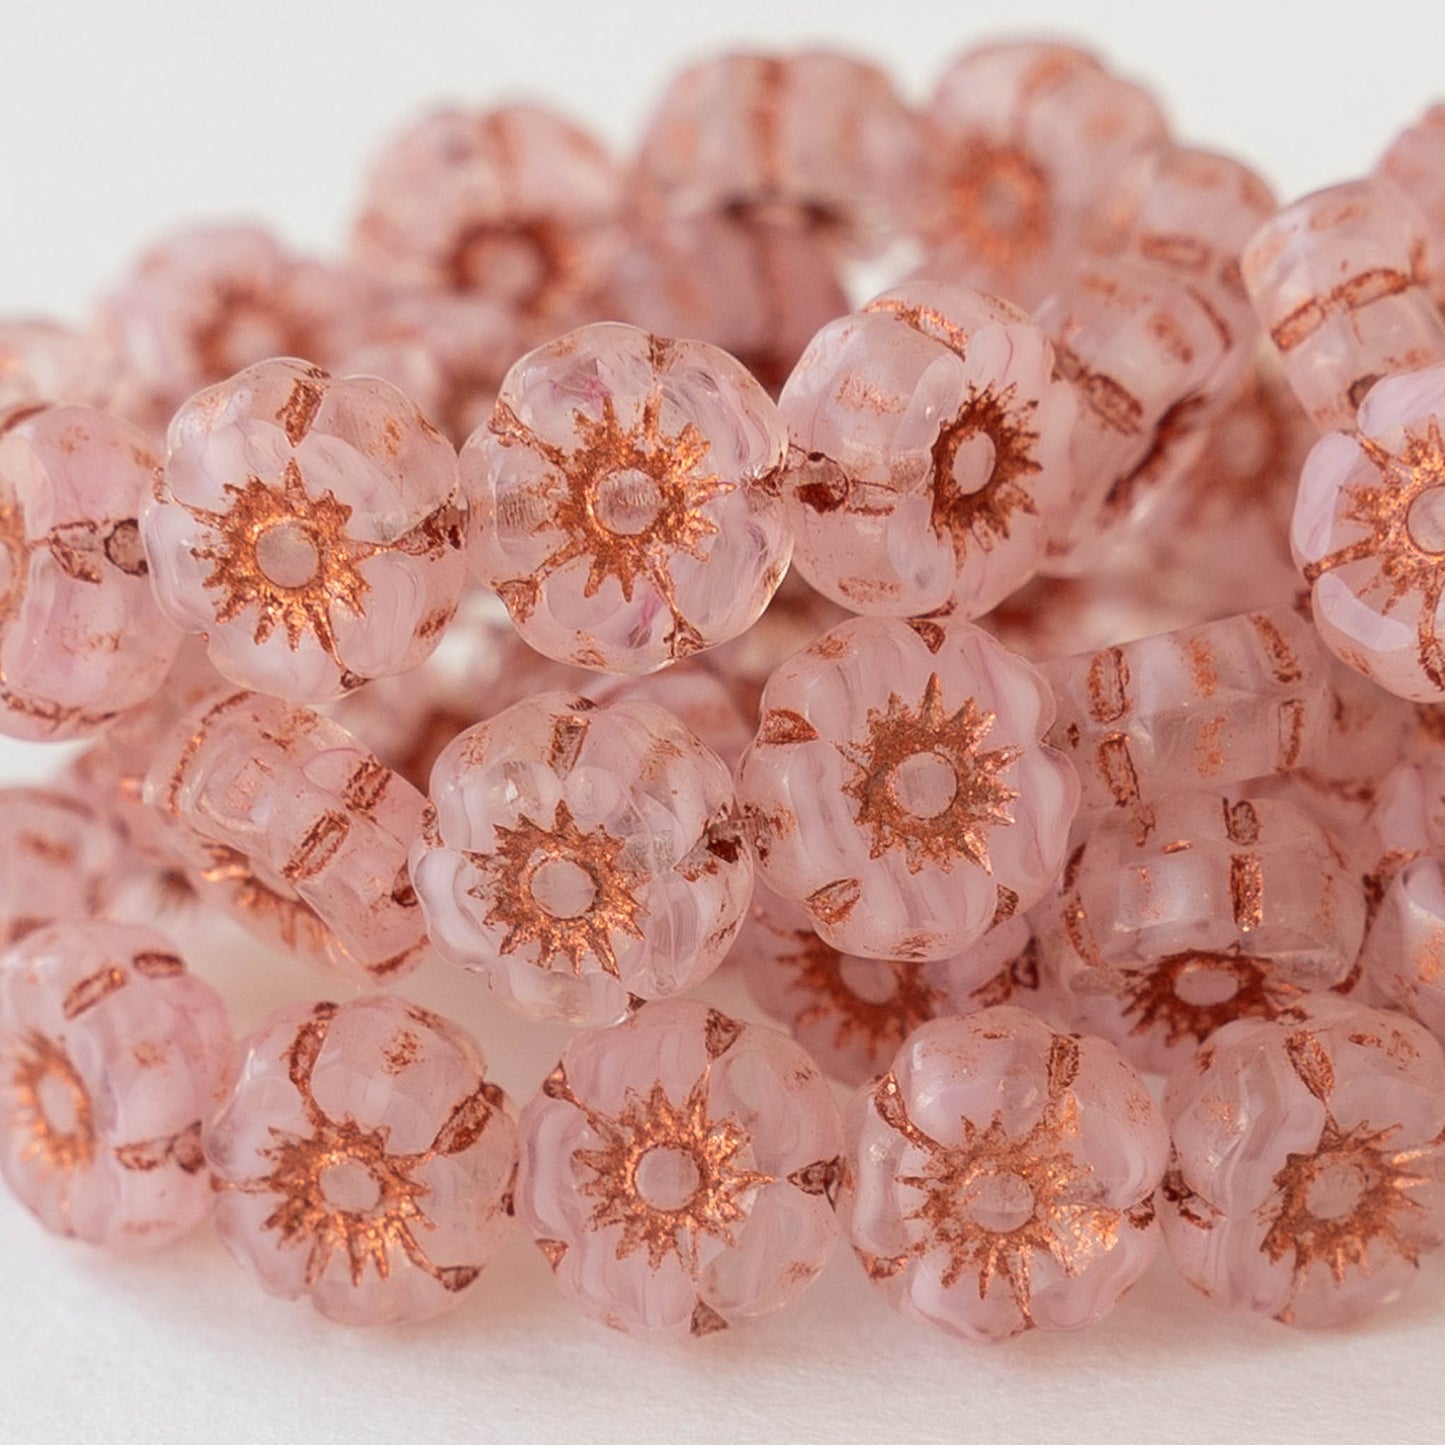 7mm Glass Flower Beads - Pink with Copper Wash - 12 Beads